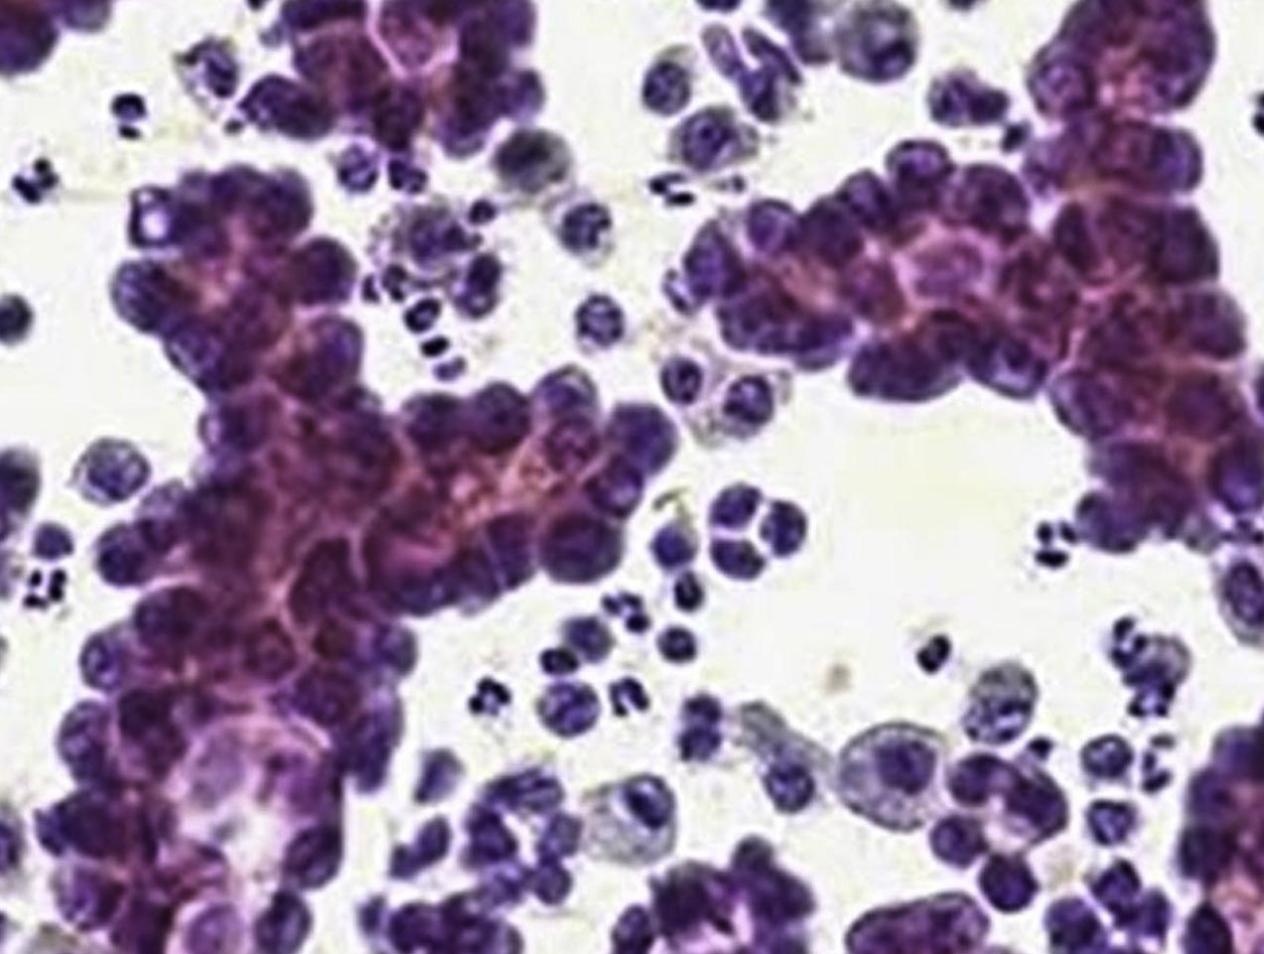 Papillary thyroid carcinoma in a 34-year old female patient.